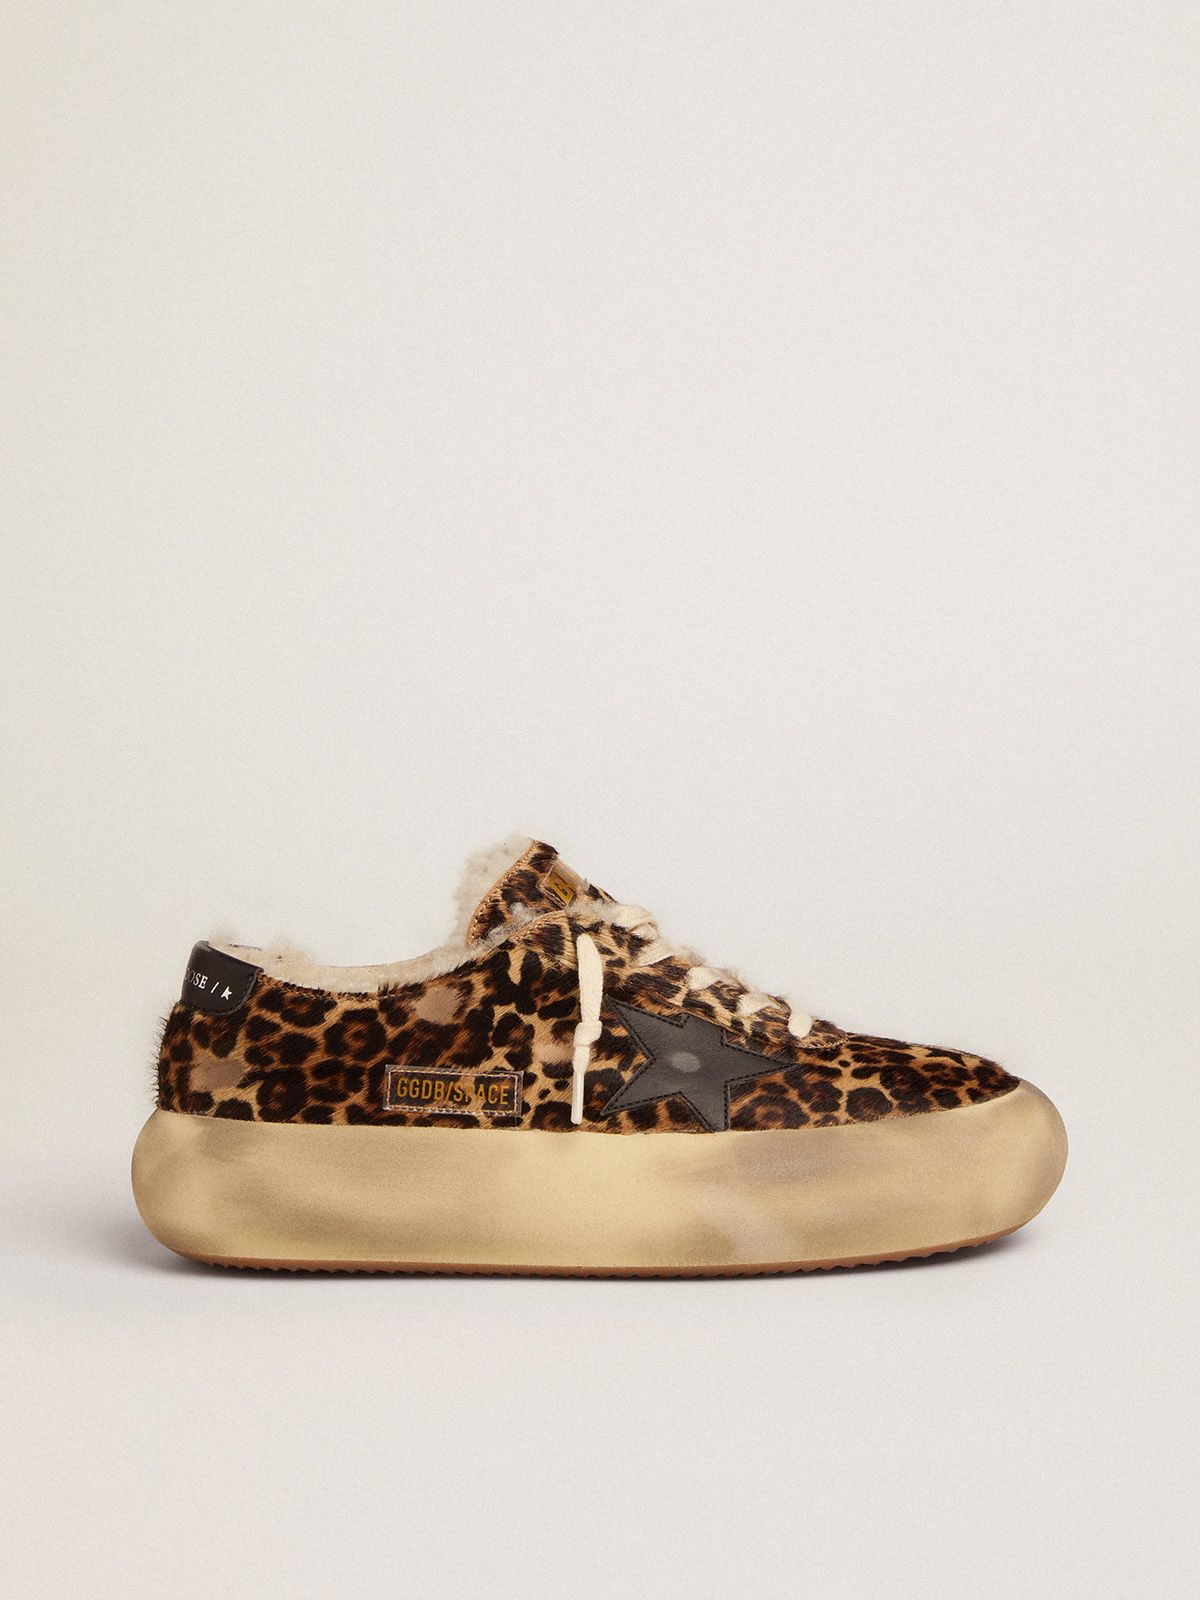 golden goose shearling Space-Star animal-print in shoes skin lining with pony